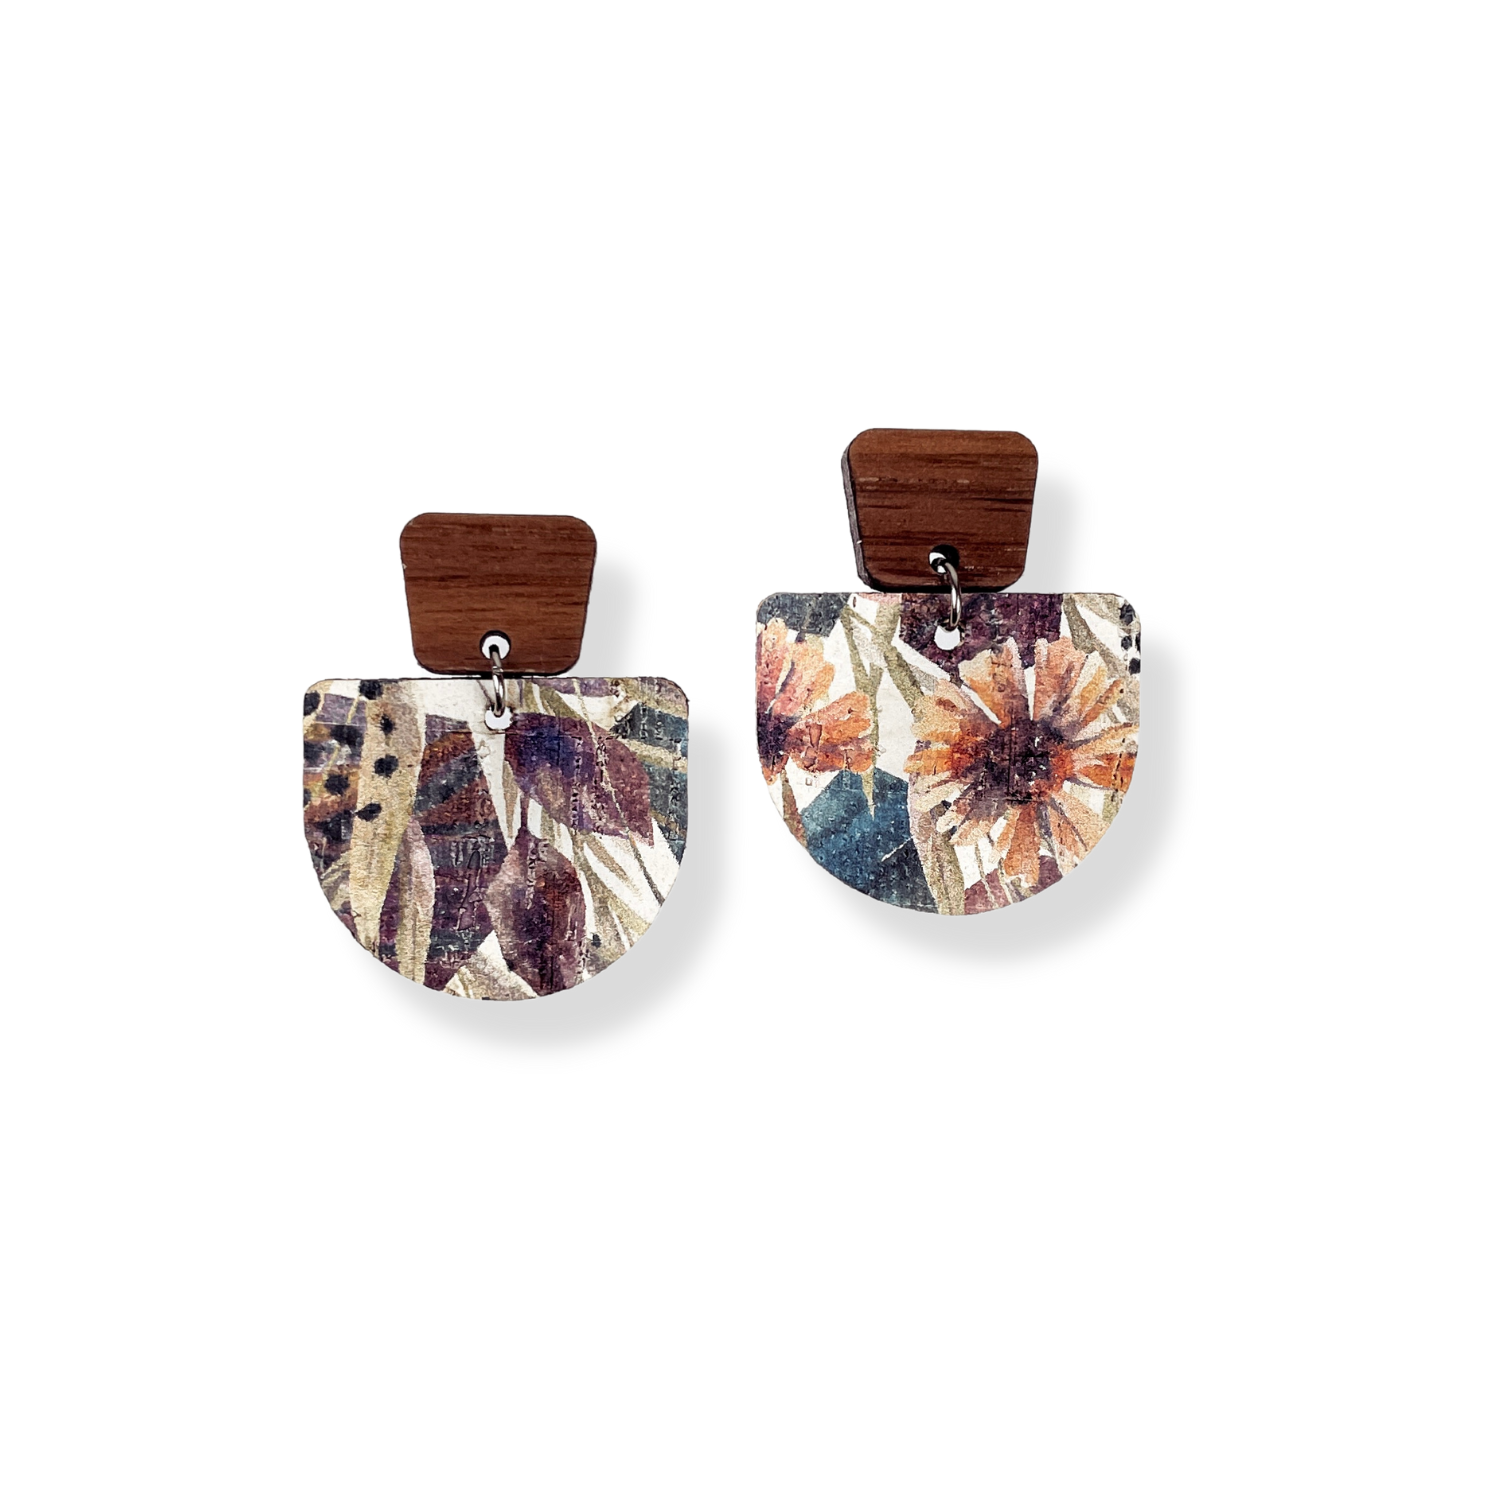 Charlie Walnut Wood and Cork Earrings- Autumn Floral